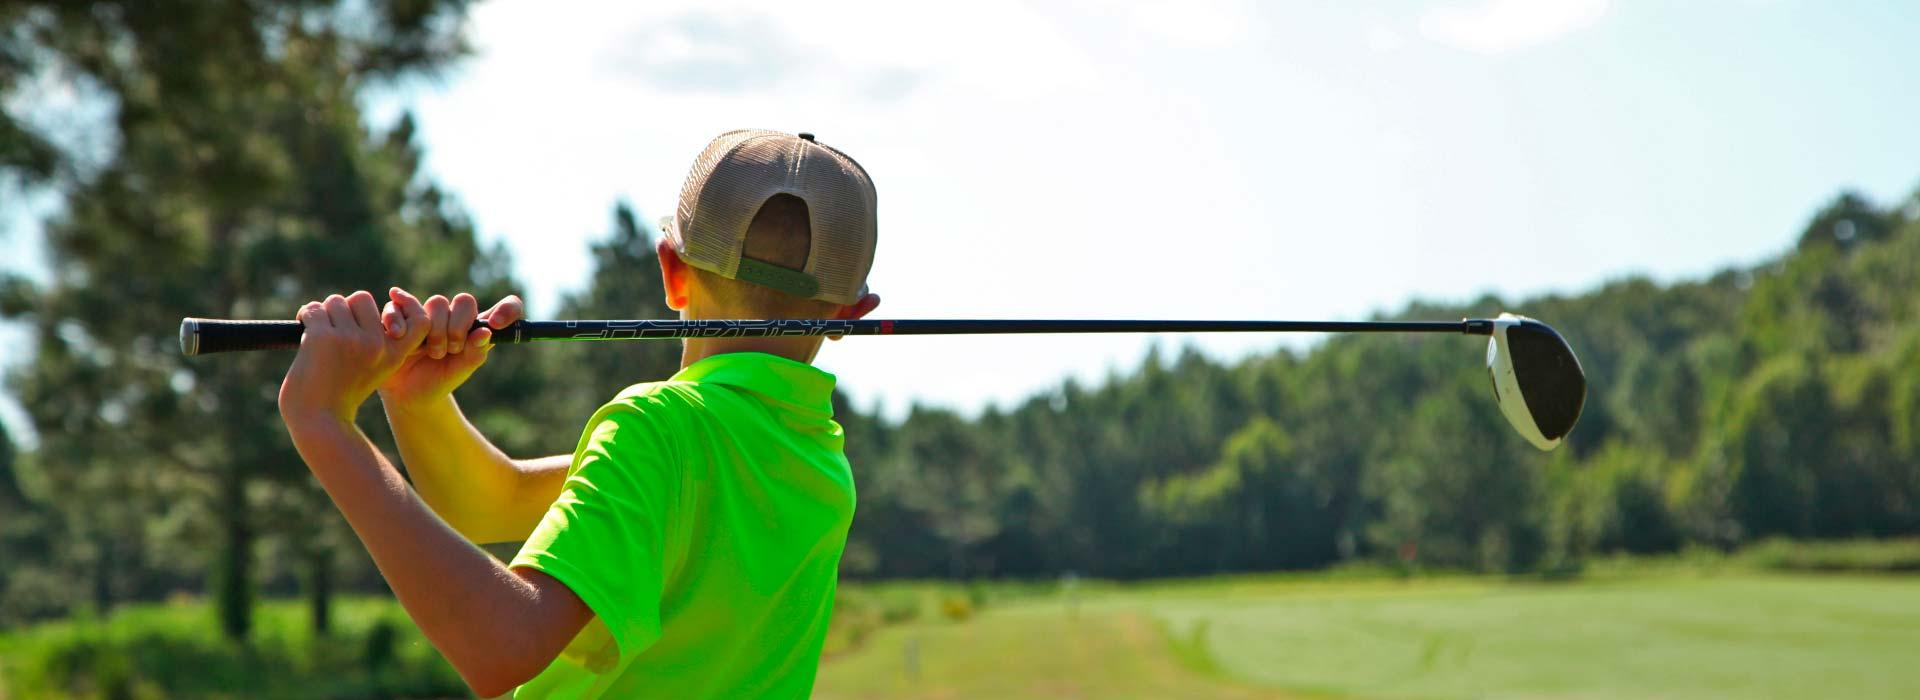 Child hitting golf ball with driver